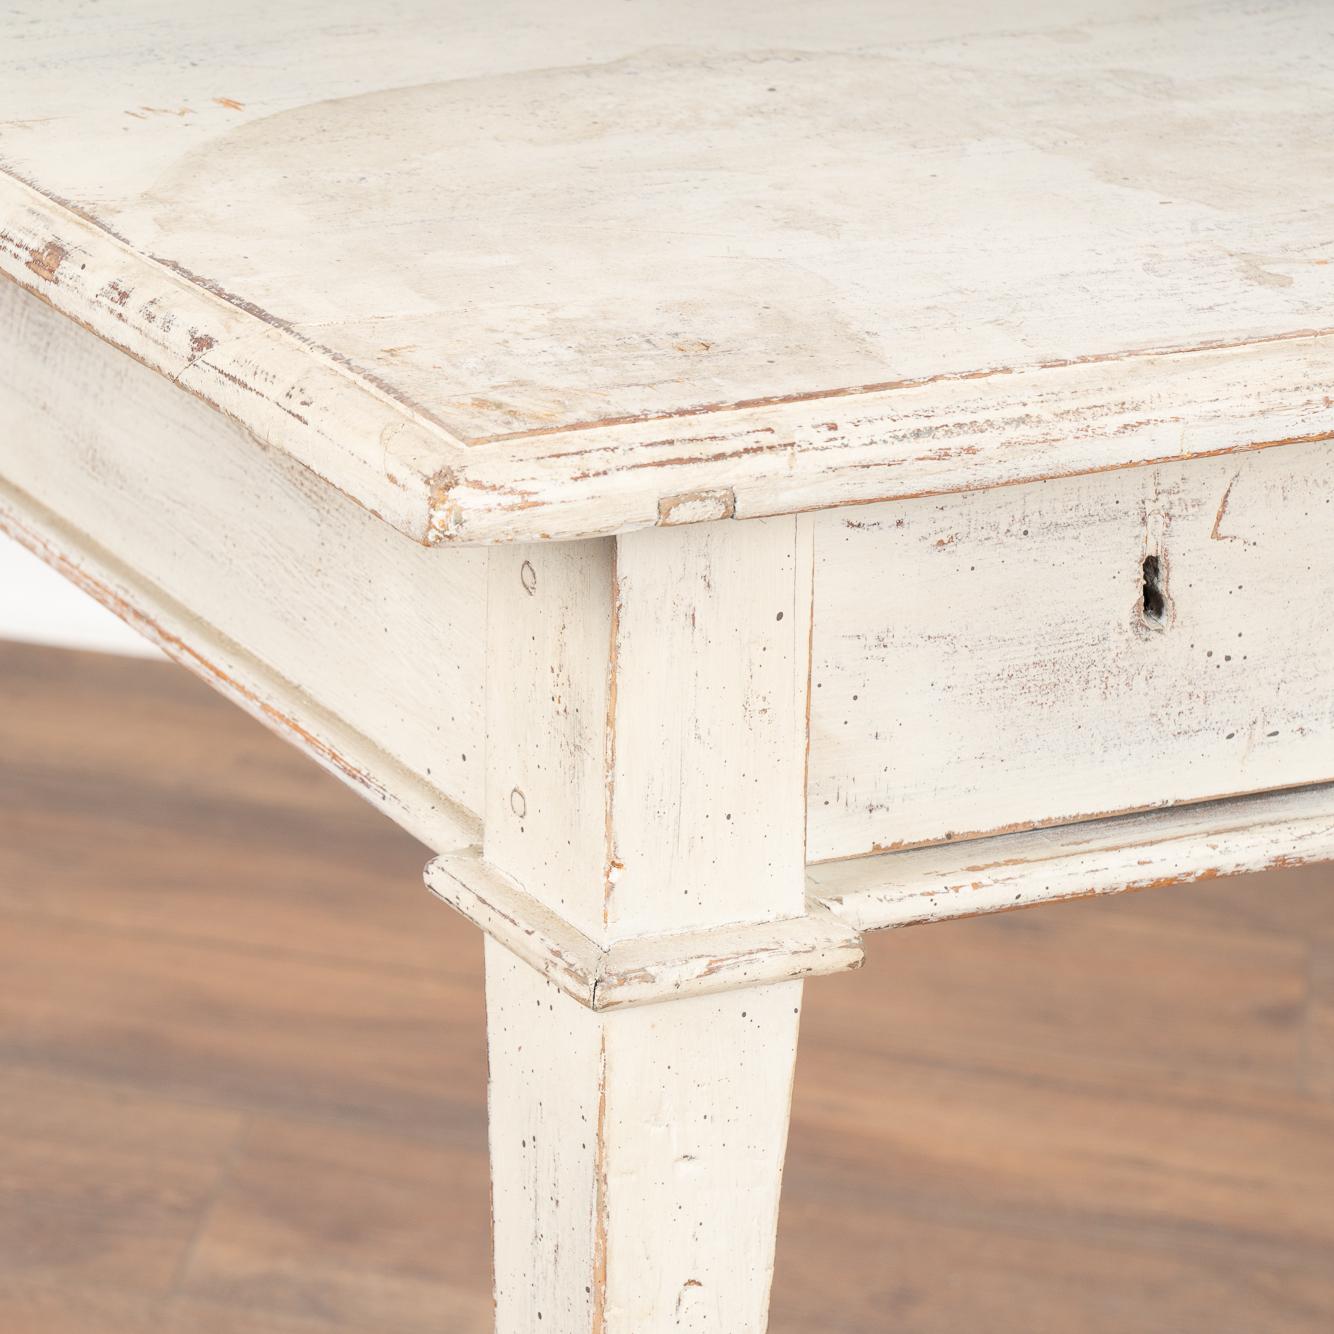 19th Century Antique White Side Table Small Writing Table With 3 Drawers, Sweden circa 1880